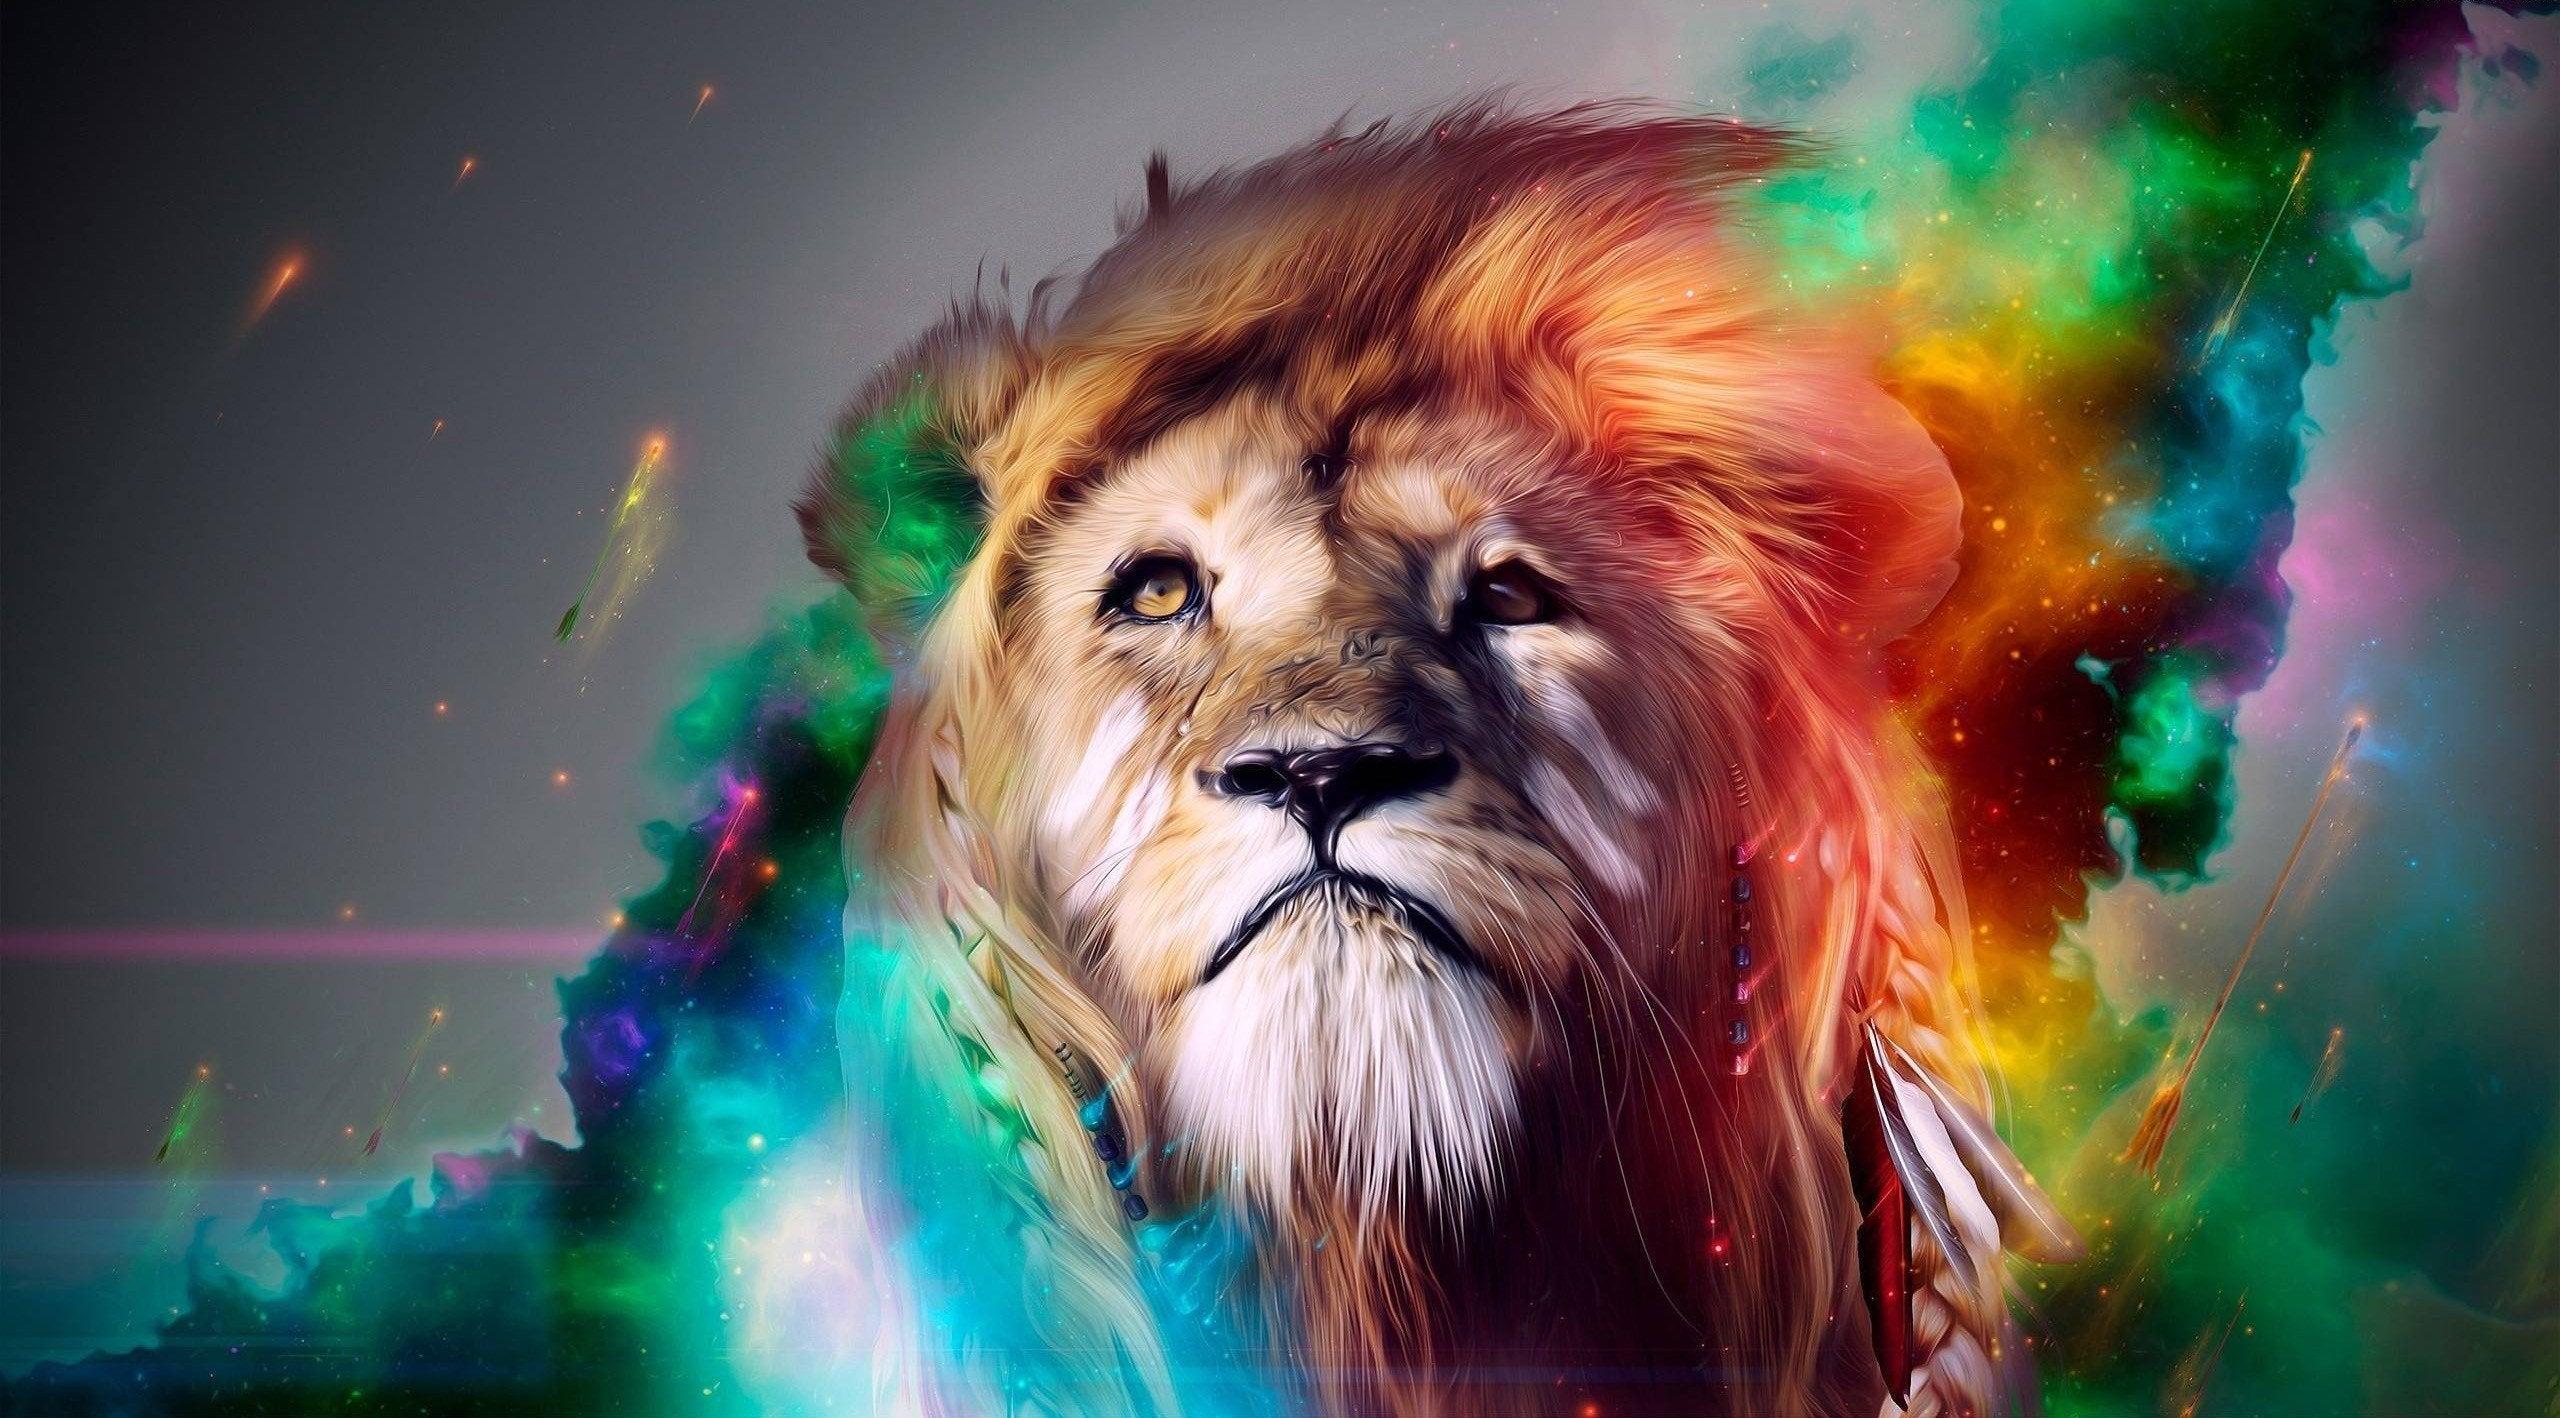 Super colorful and majestic lion my favorite wallpaper r